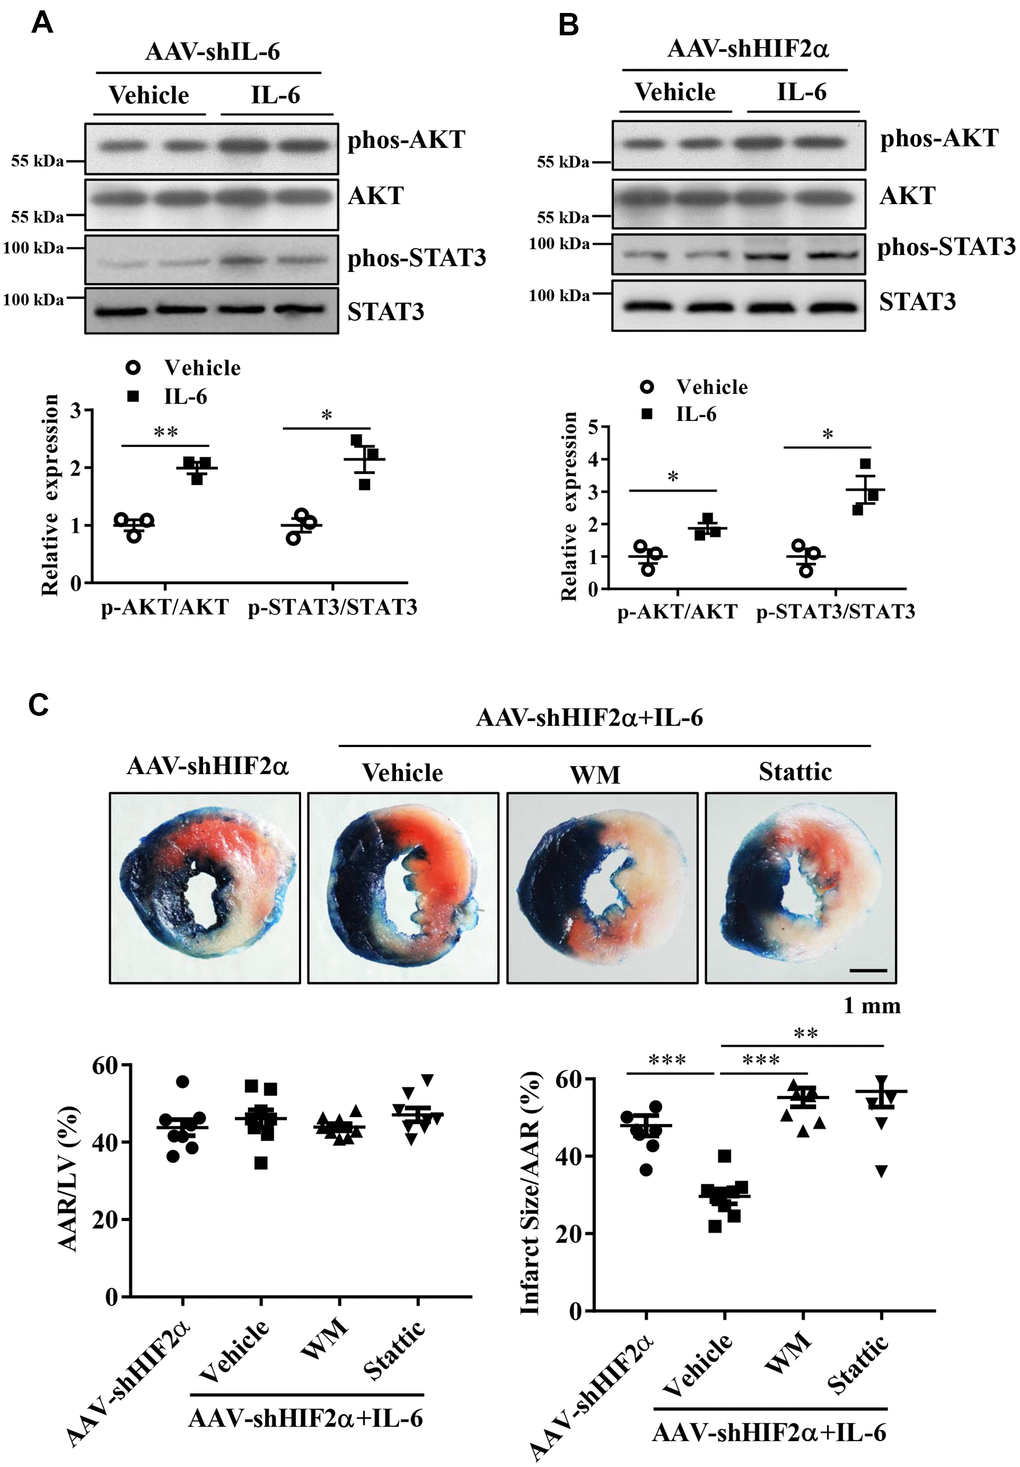 The roles of the PI3K/Akt and STAT3 pathways in the protective effects of HIF2α/IL-6. (A, B) Western blotting was performed to determine the protein expression of AKT, Phos-AKT, STAT3 and Phos-STAT3 in myocardium. n = 3 per group. (C) Representative image and quantitative analysis of infarct staining with different treatments. n = 8 per group. Data represent the mean ± SEM. *PPP